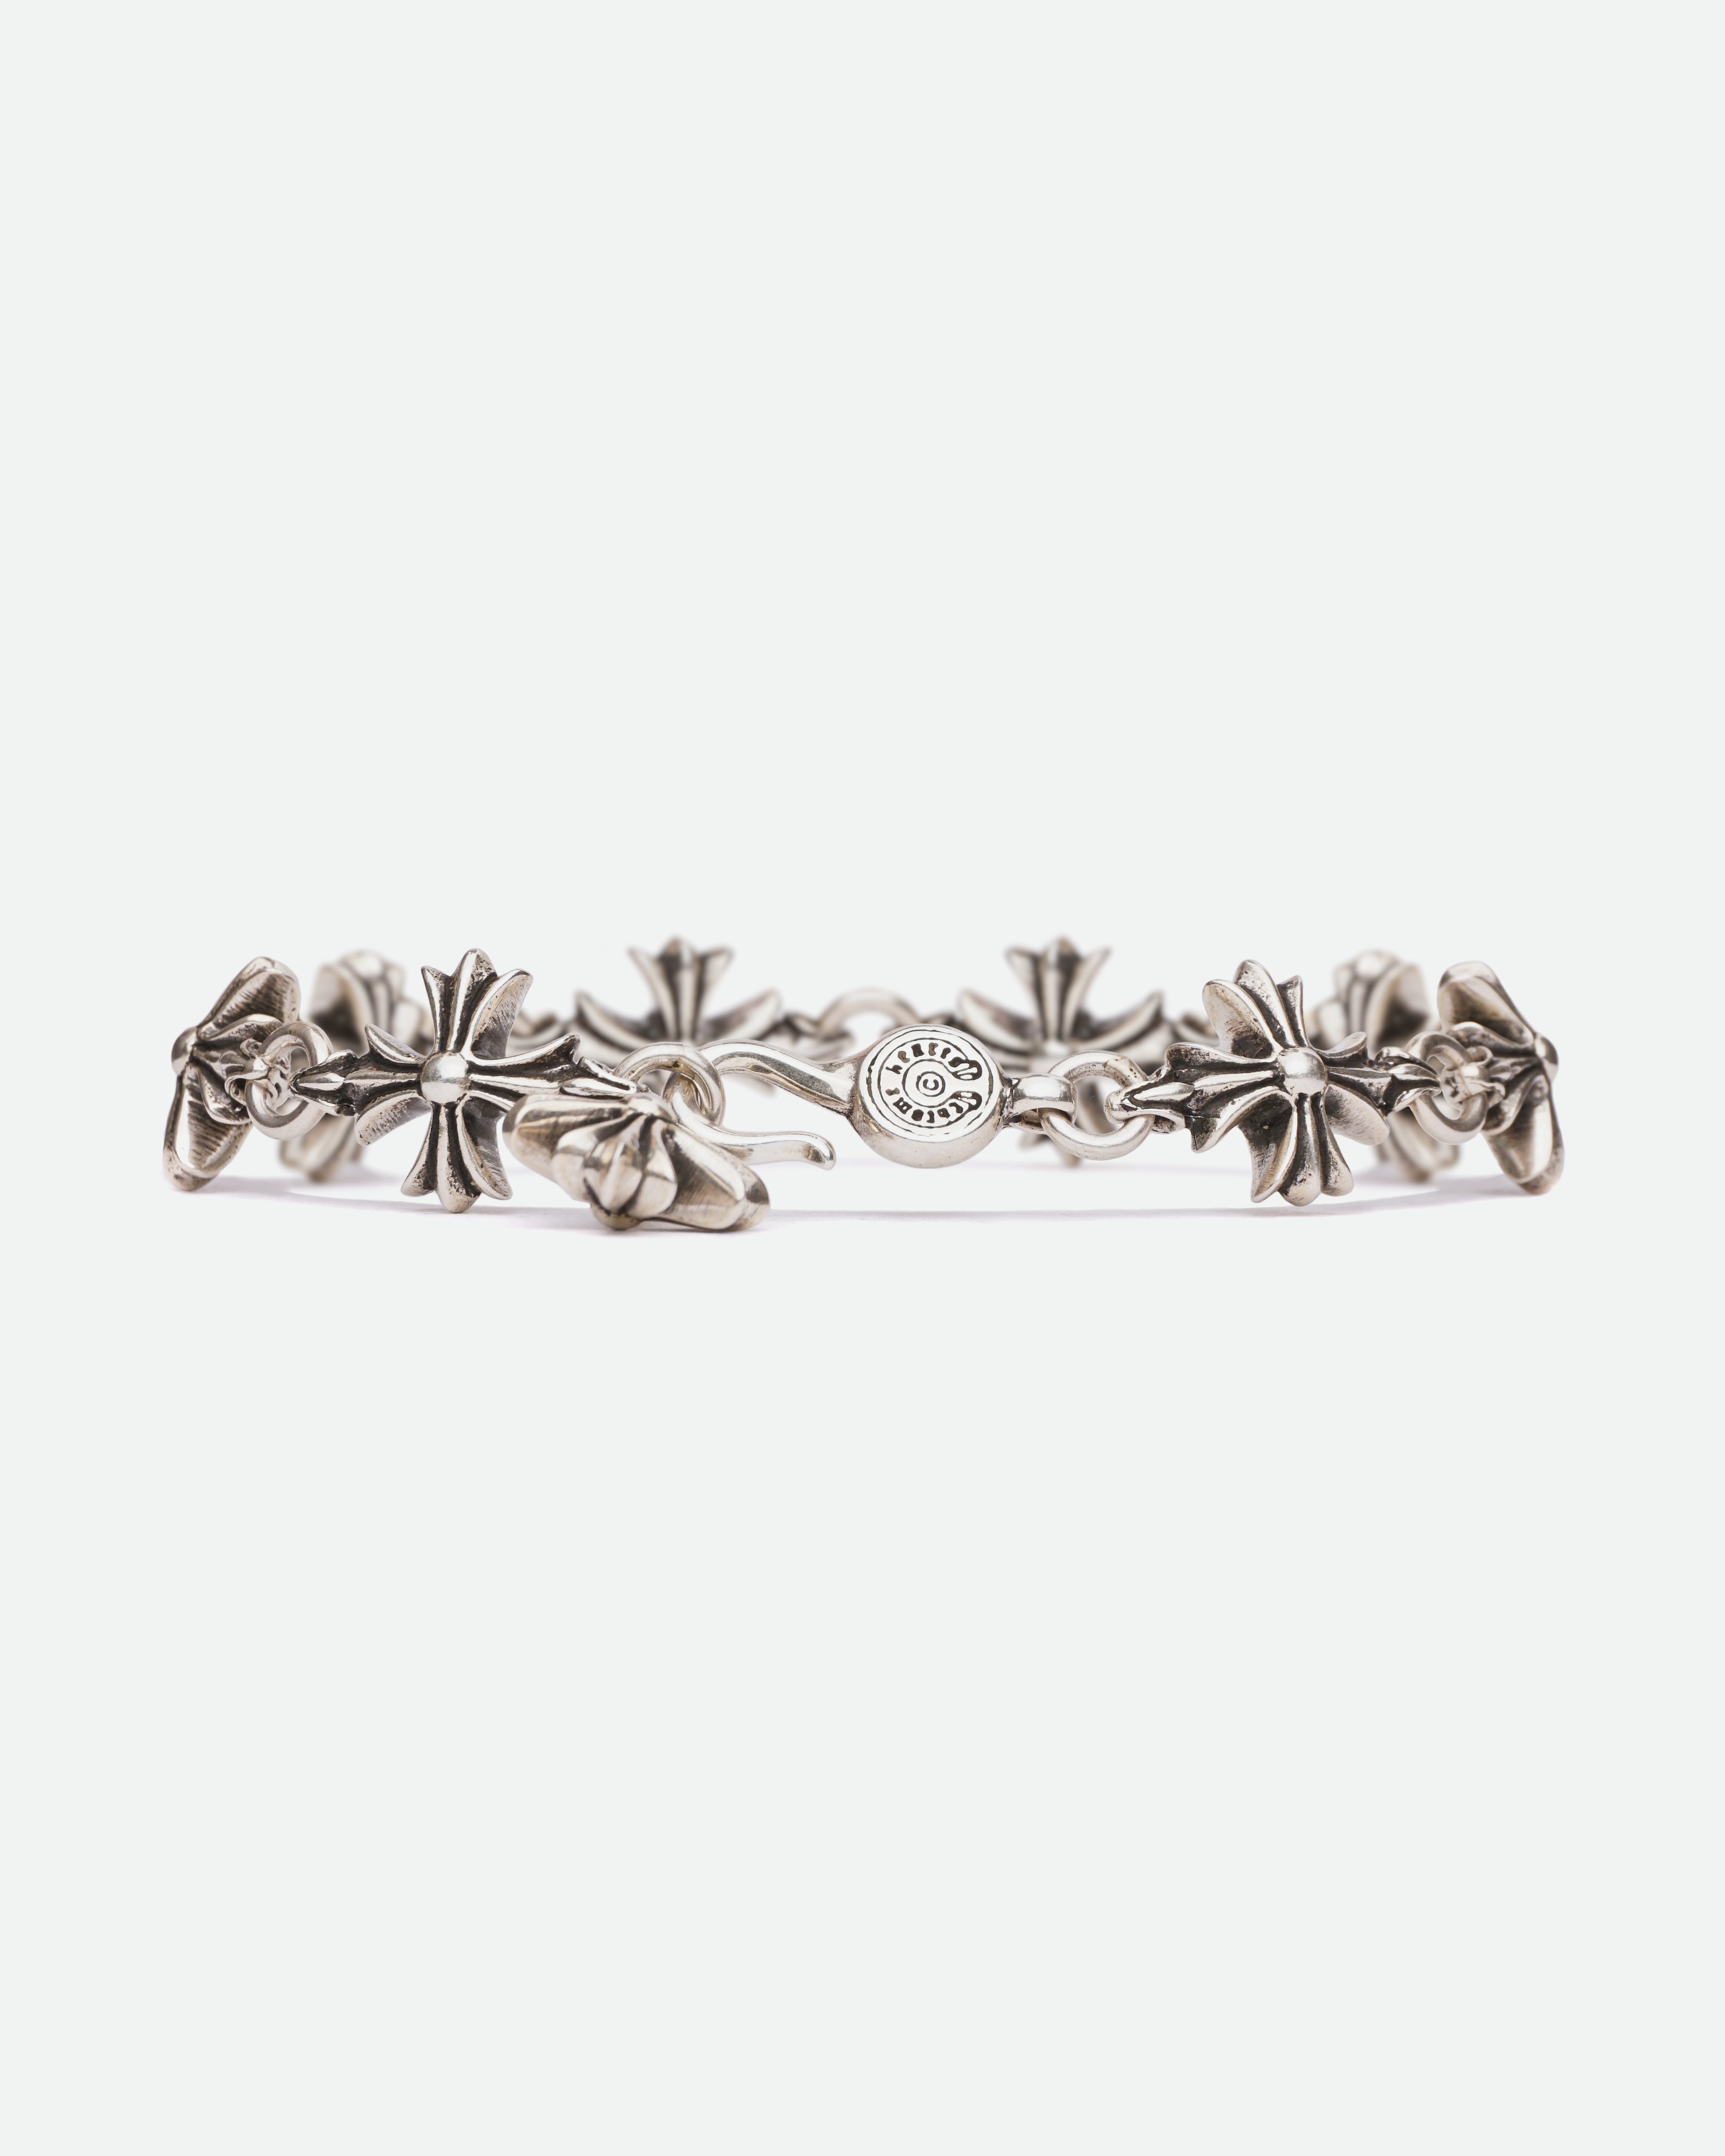 Buy Chrome Hearts ChromeHearts Size: 11LINK ID DGGR HEART / Dagger Heart ID  Classic Link Silver Bracelet from Japan - Buy authentic Plus exclusive  items from Japan | ZenPlus